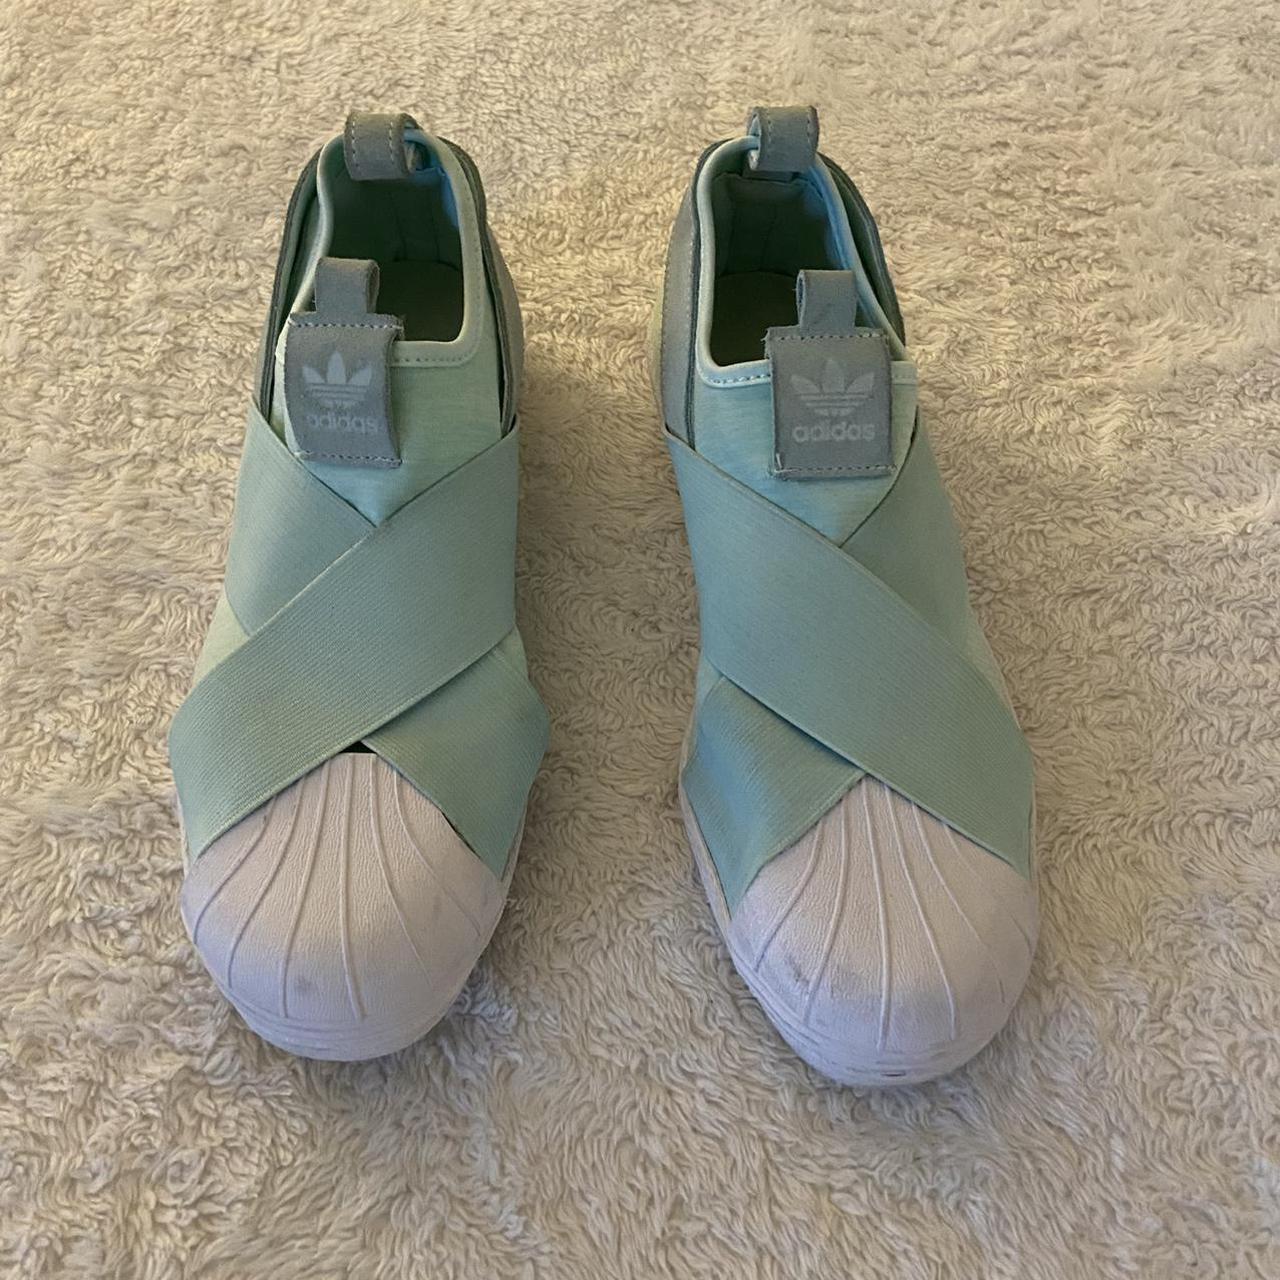 Product Image 2 - Turquoise Adidas Sneaker Shoes

Size 8